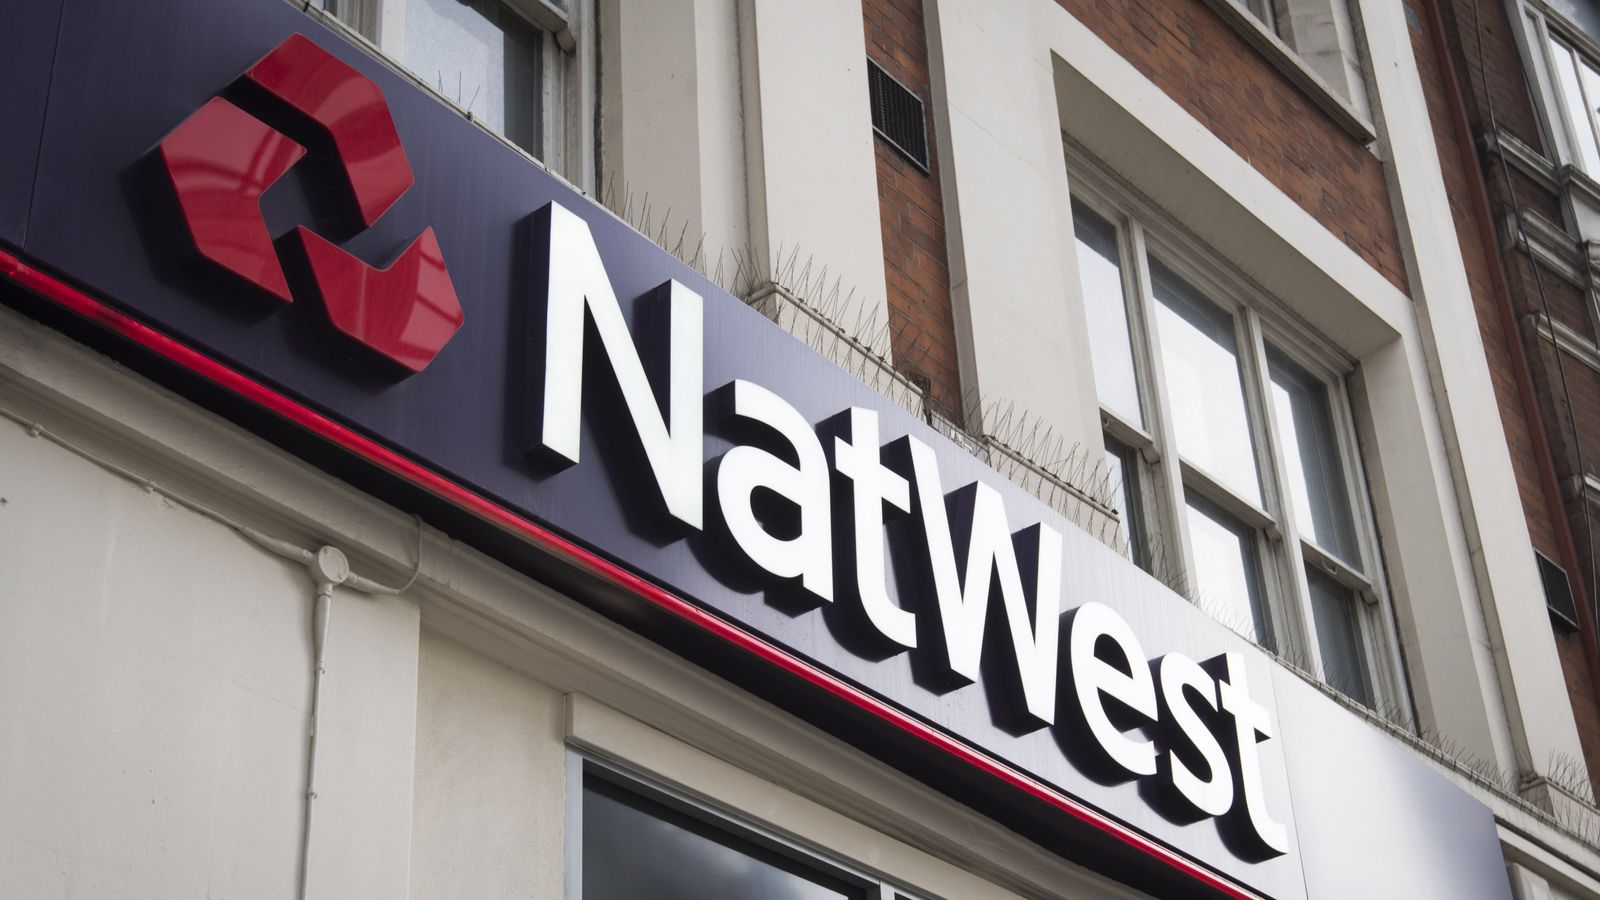 NatWest beats profit expectations in first quarter